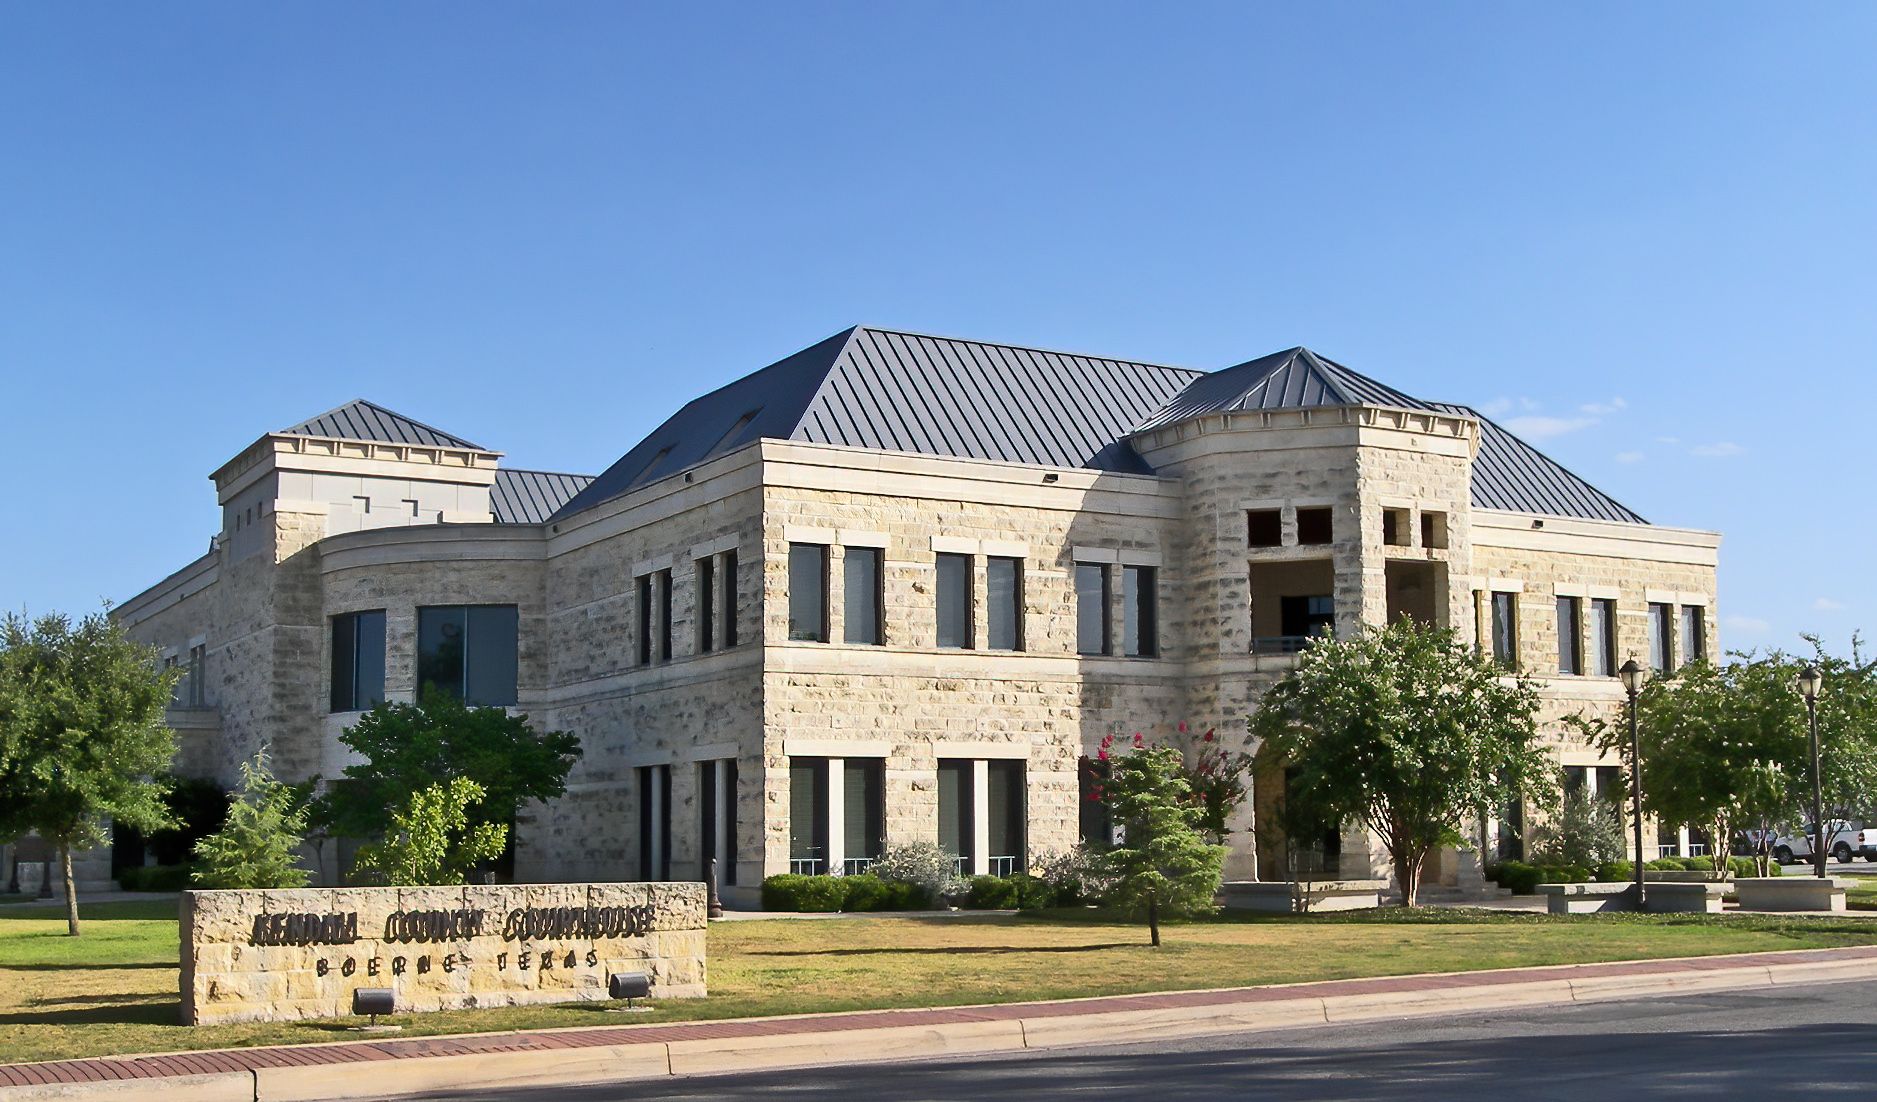 The current Kendall County Courthouse located in Boerne, Texas, United States was built in 1998